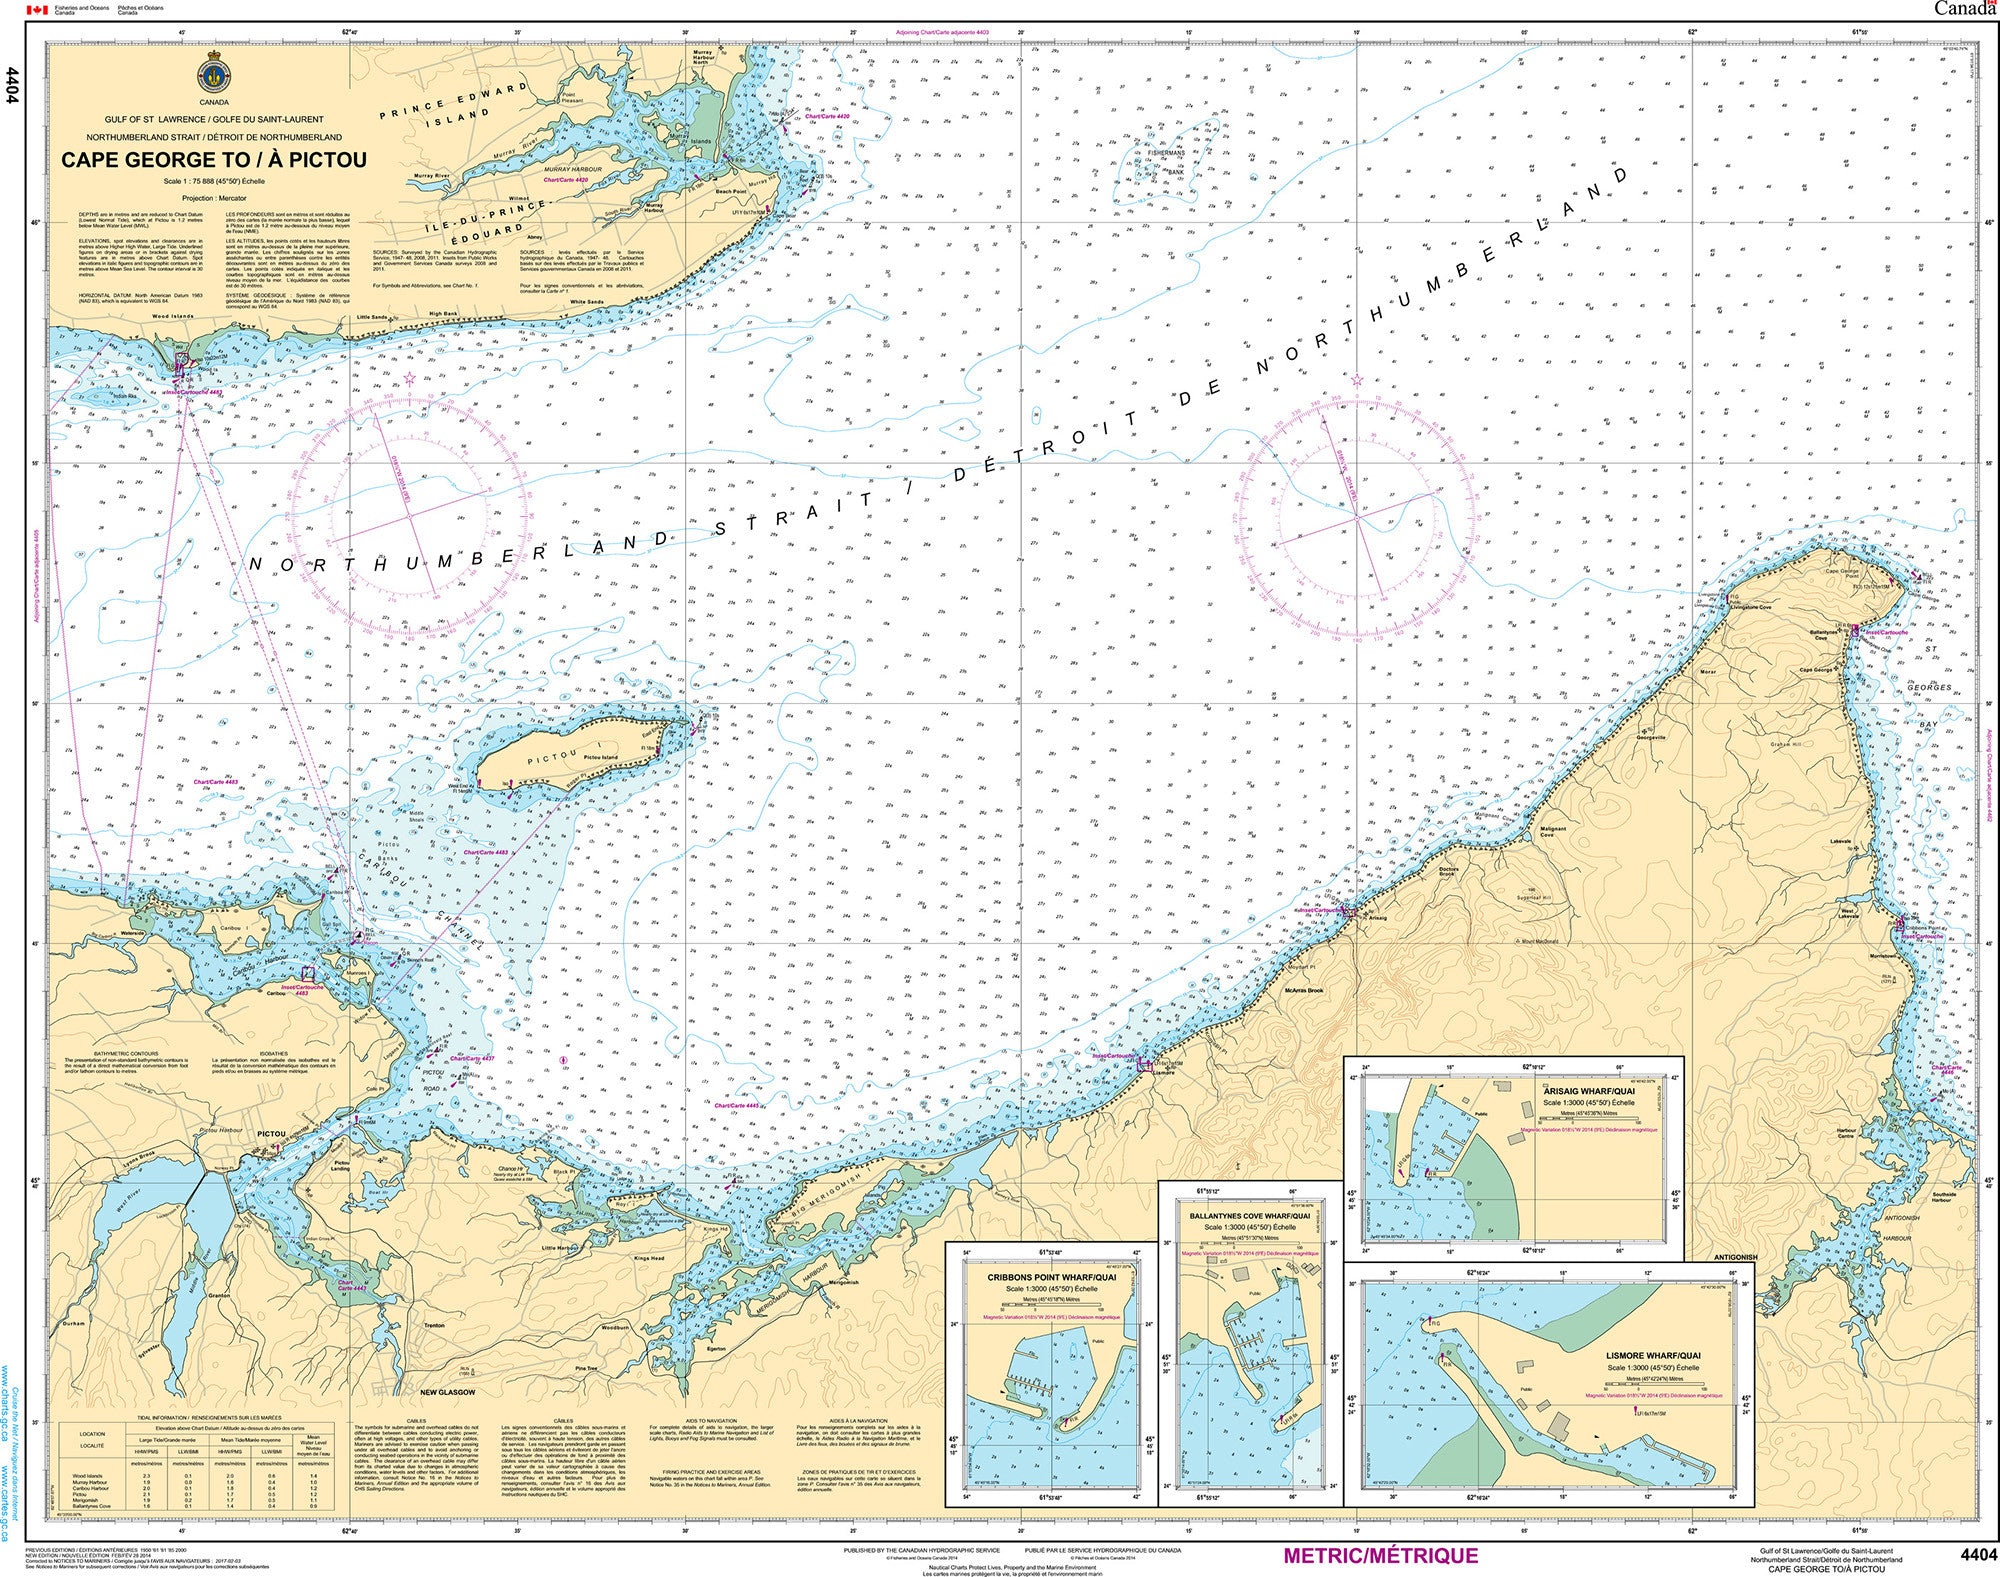 Canadian Hydrographic Service Nautical Chart CHS4404: Cape George to/à Pictou